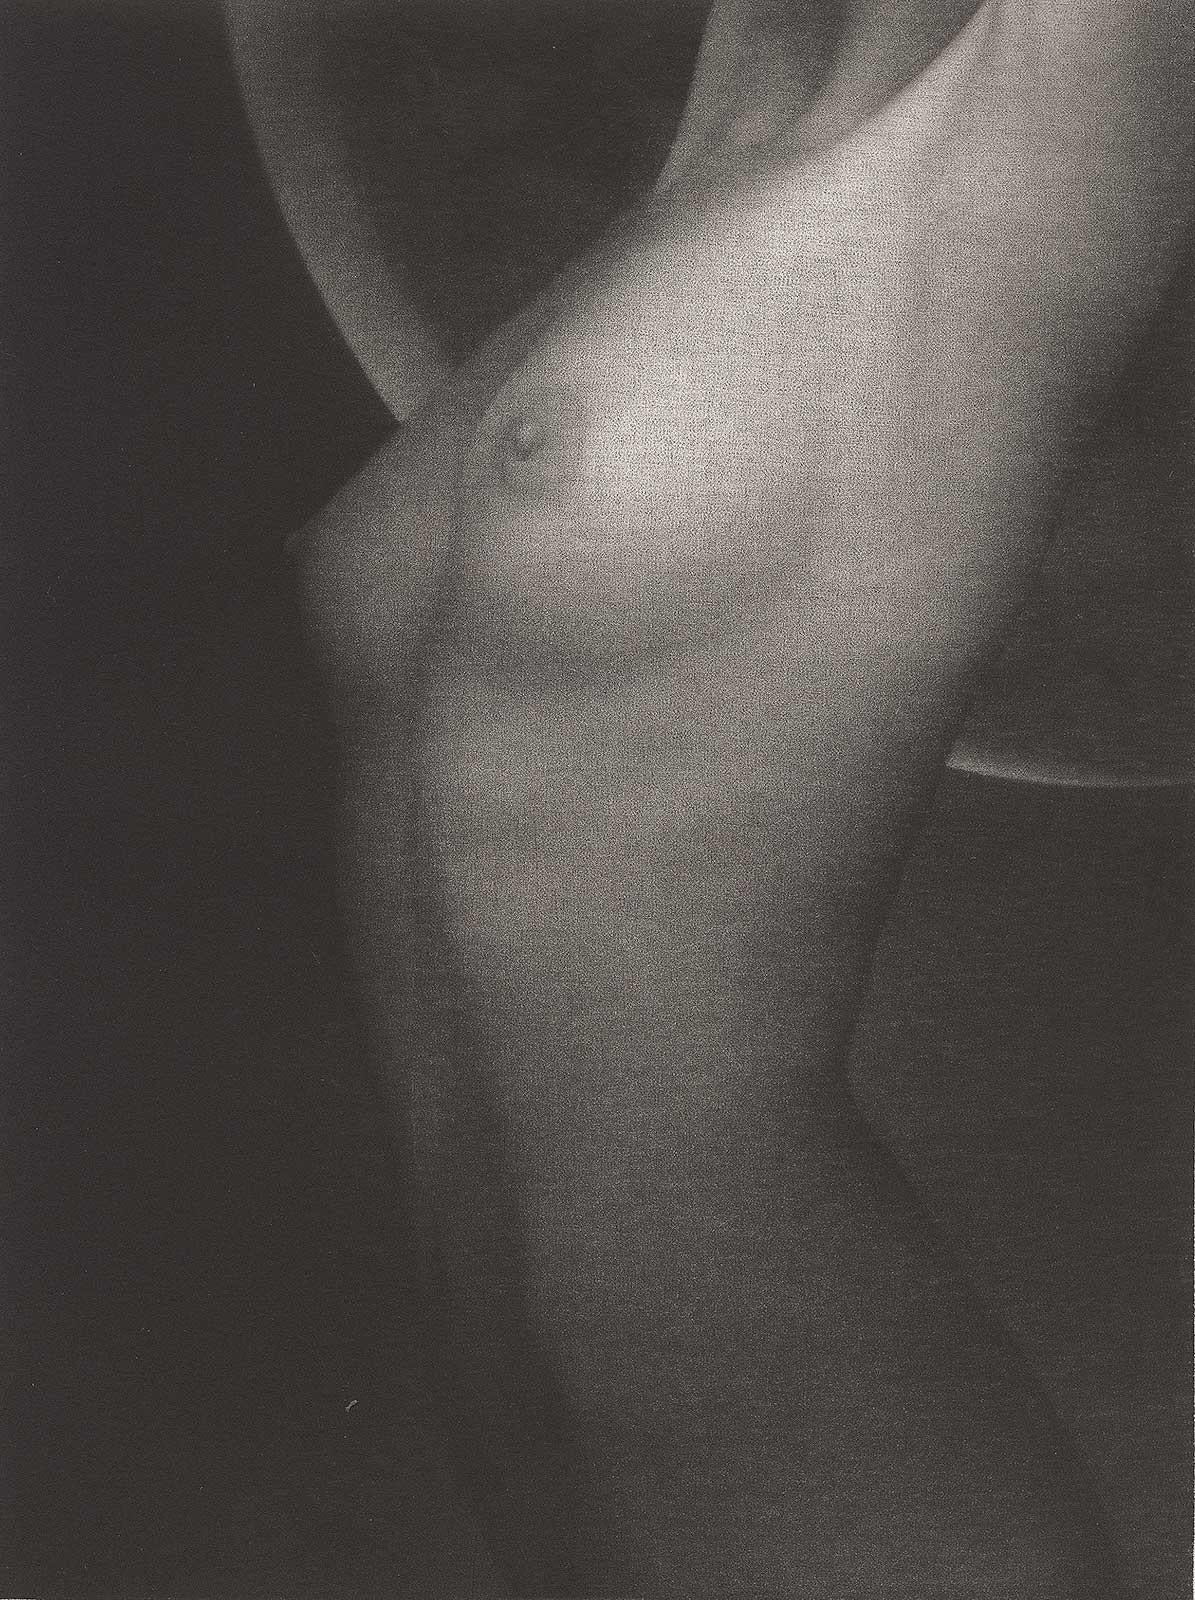 Mikio Watanabe Nude Print - Moonshine (a young nude woman posed in front of huge full moon)